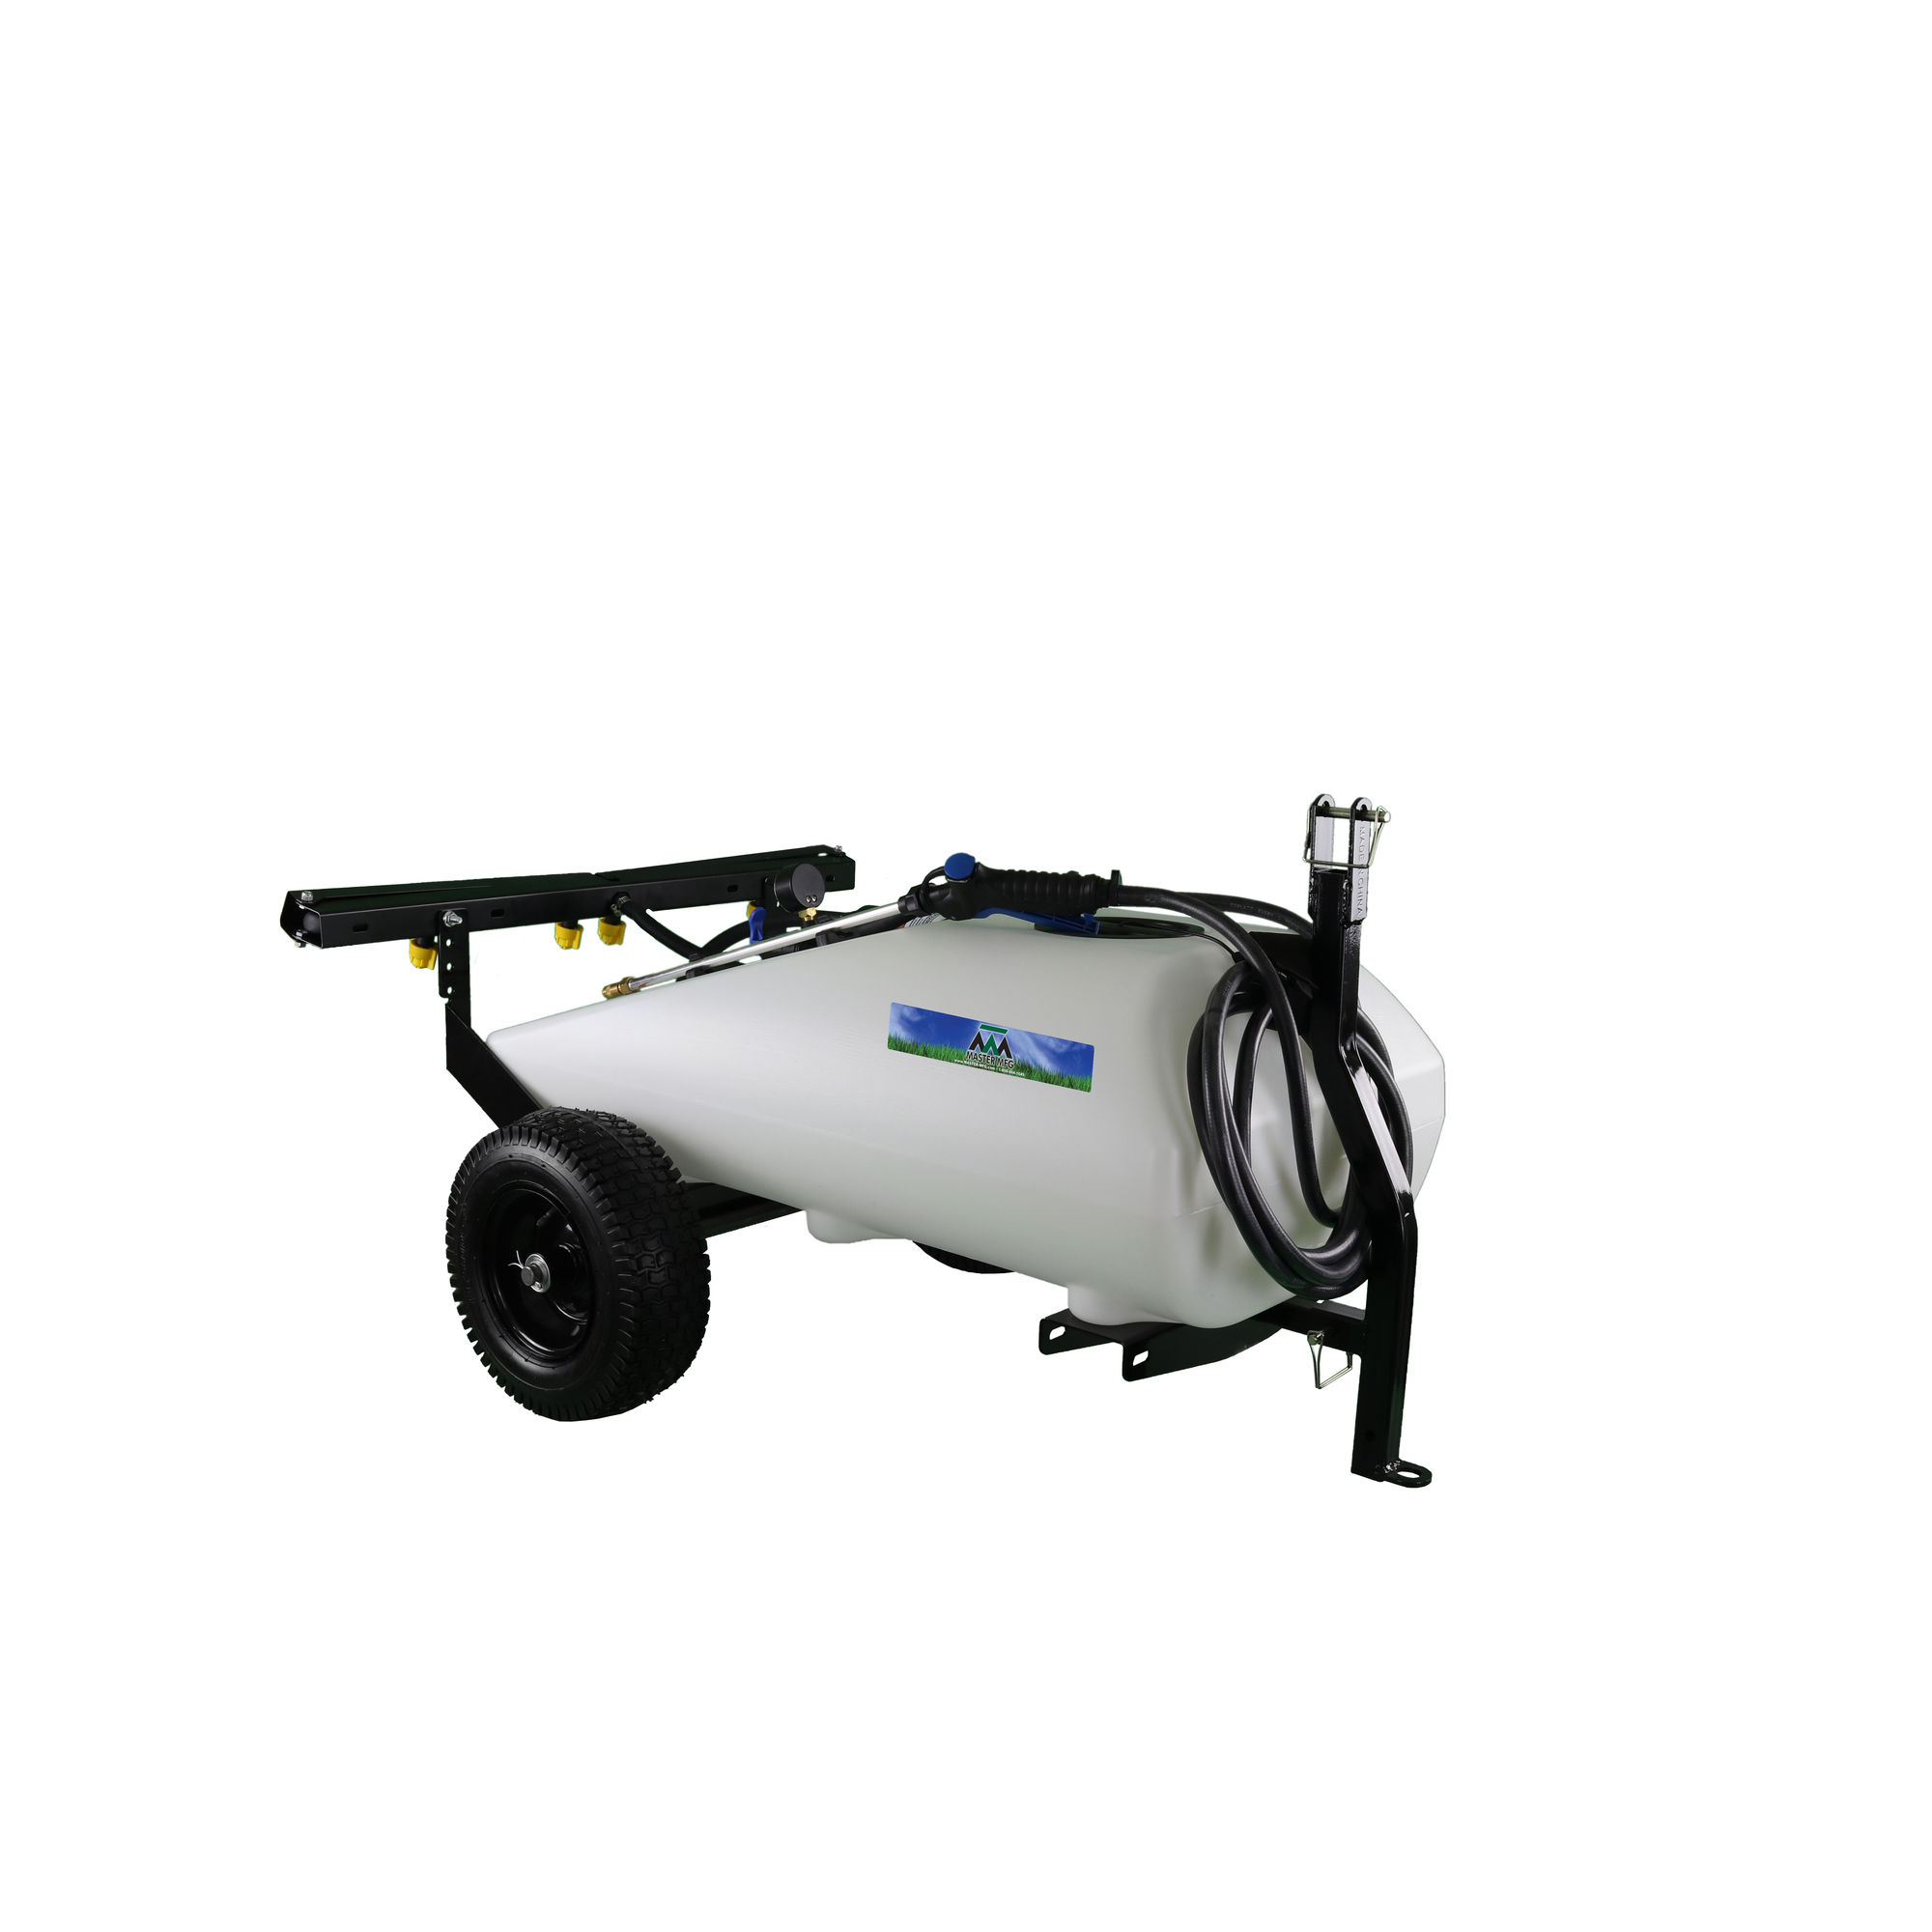 Master MFG, 24-Gal Tow Broadcast Sprayer - 2.2GPM, 7ft. Swath, Tank Size 24 Gal, Flow 2.2 GPM, Pressure 70 PSI, Model SLO-41-024D-MM